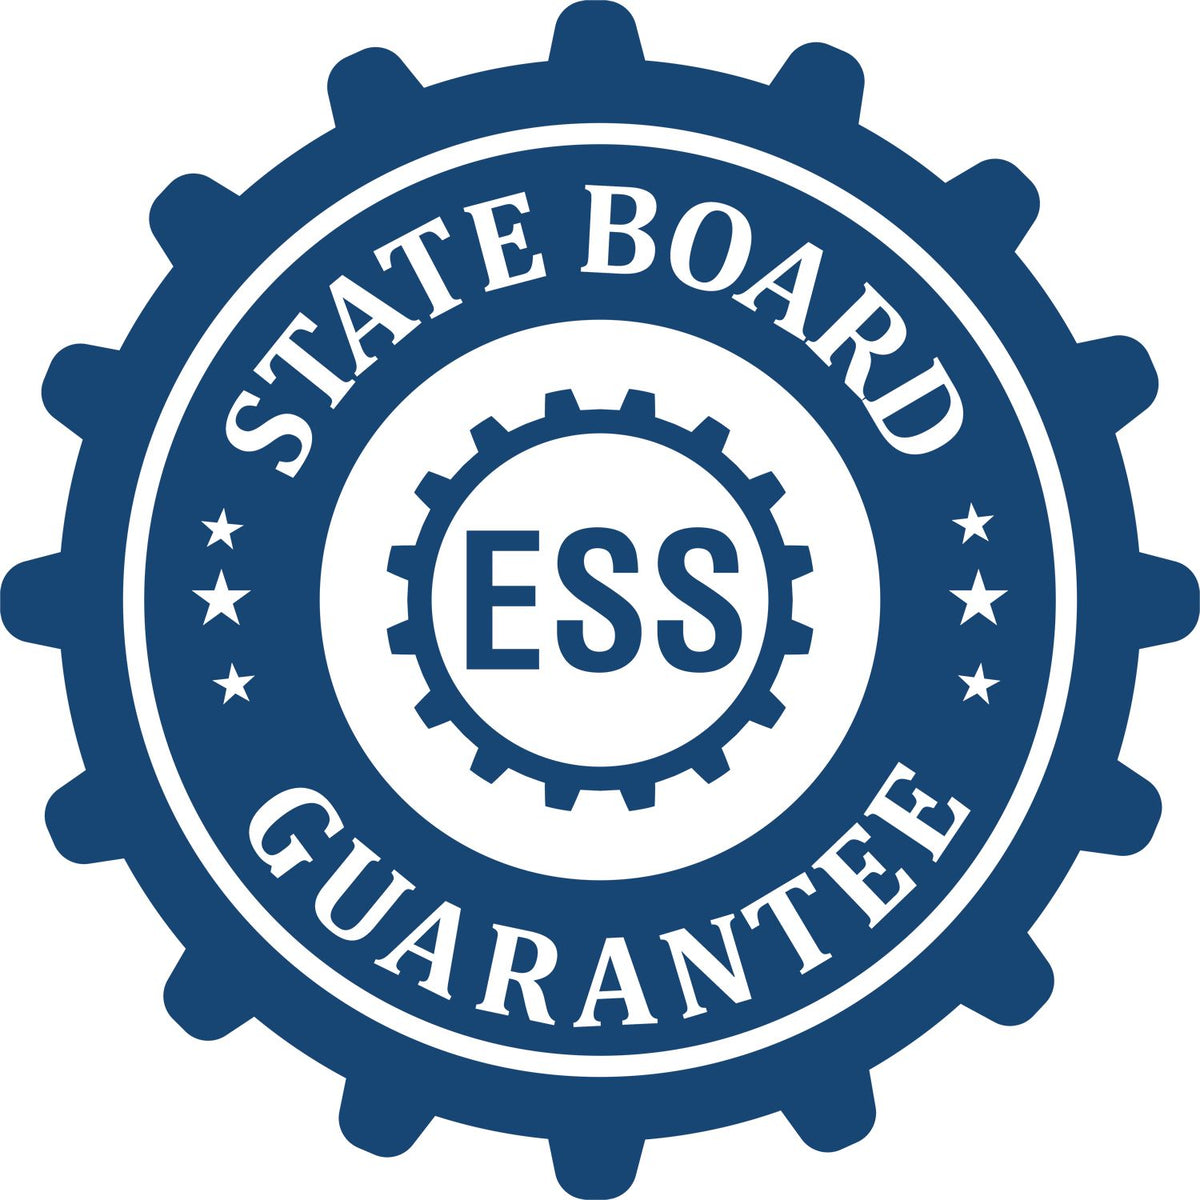 An emblem in a gear shape illustrating a state board guarantee for the Gift Ohio Landscape Architect Seal